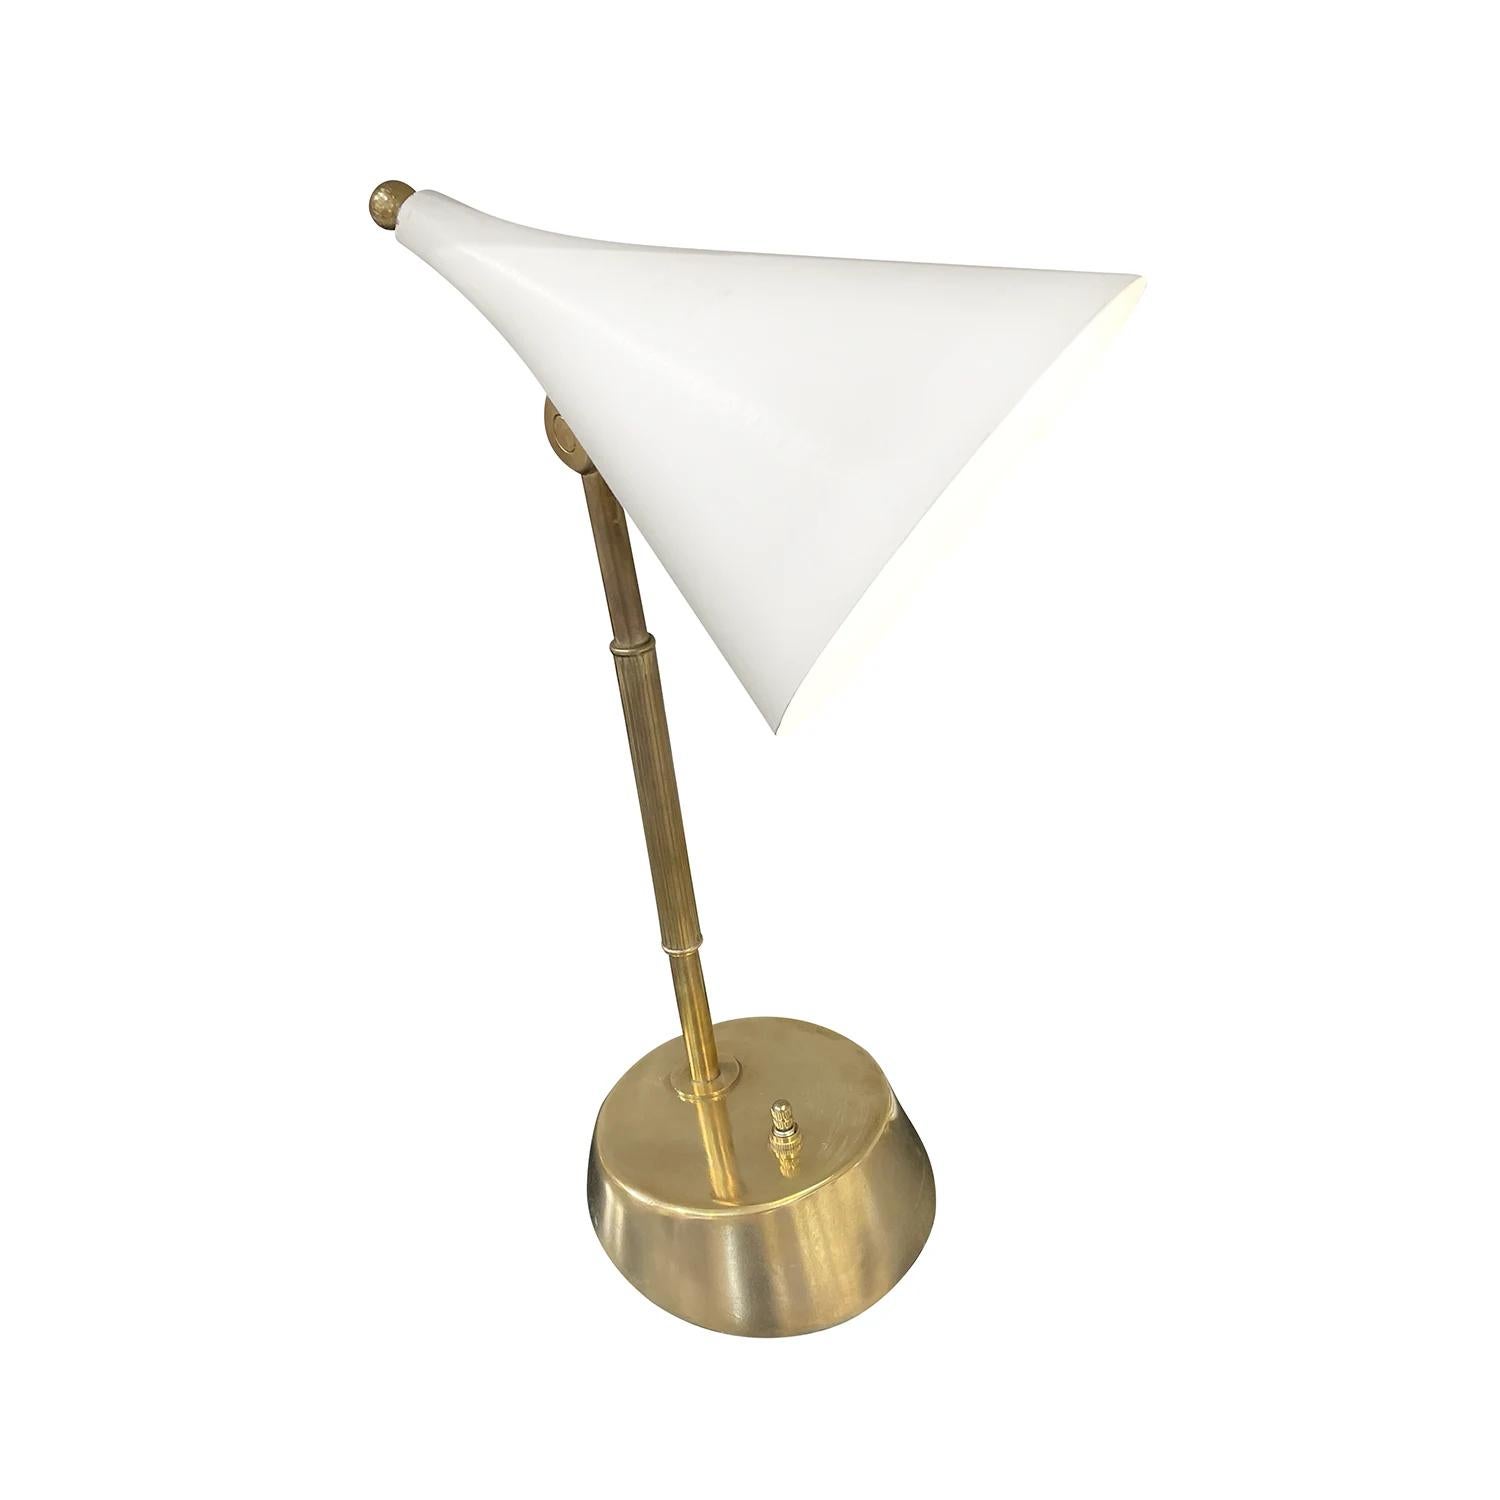 20th Century Italian Metal, Brass Desk Lamp - Vintage Lacquered Aluminum Light In Good Condition For Sale In West Palm Beach, FL